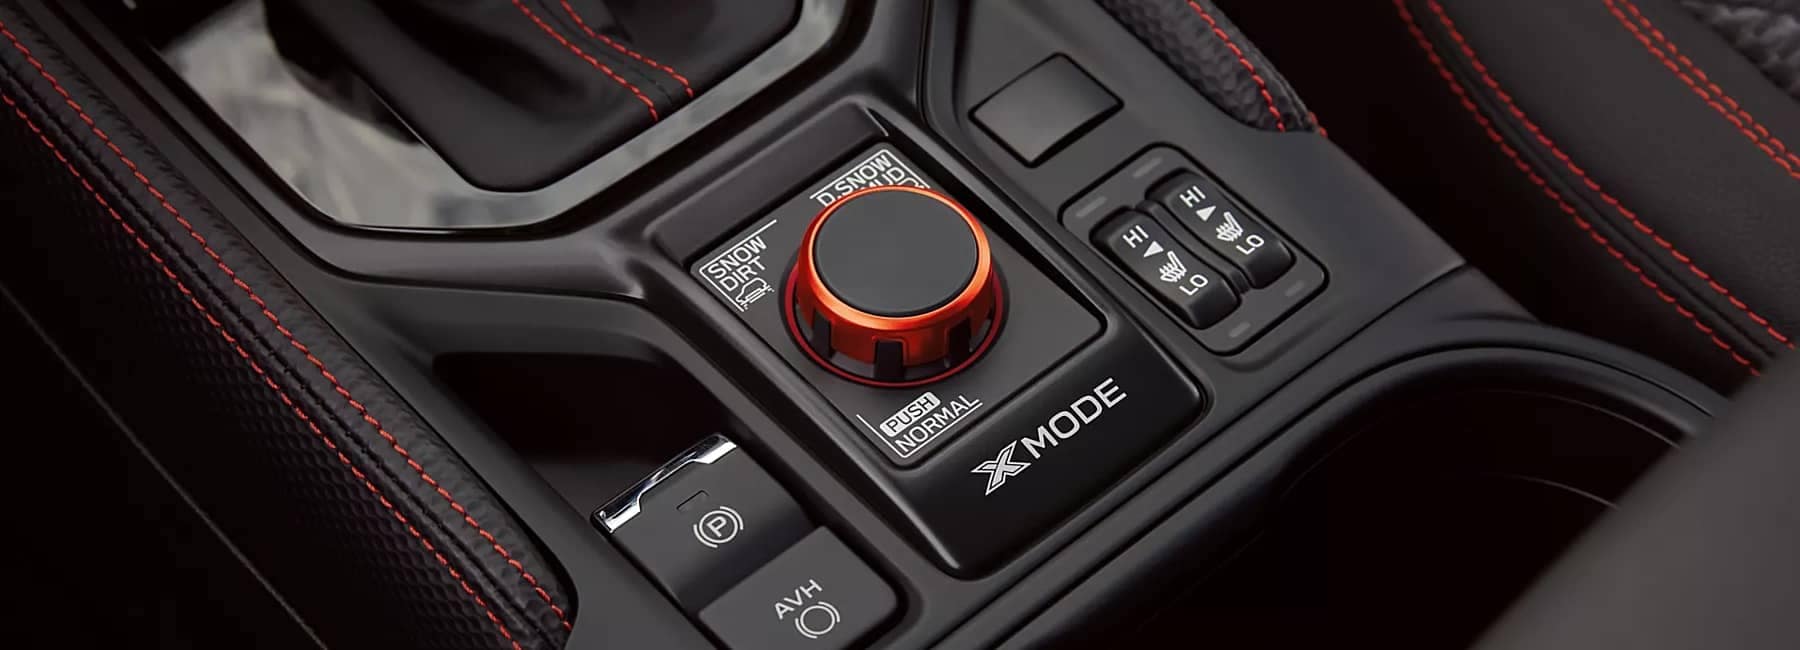 2022 Forester-closeup on center consle_shifter- black_red